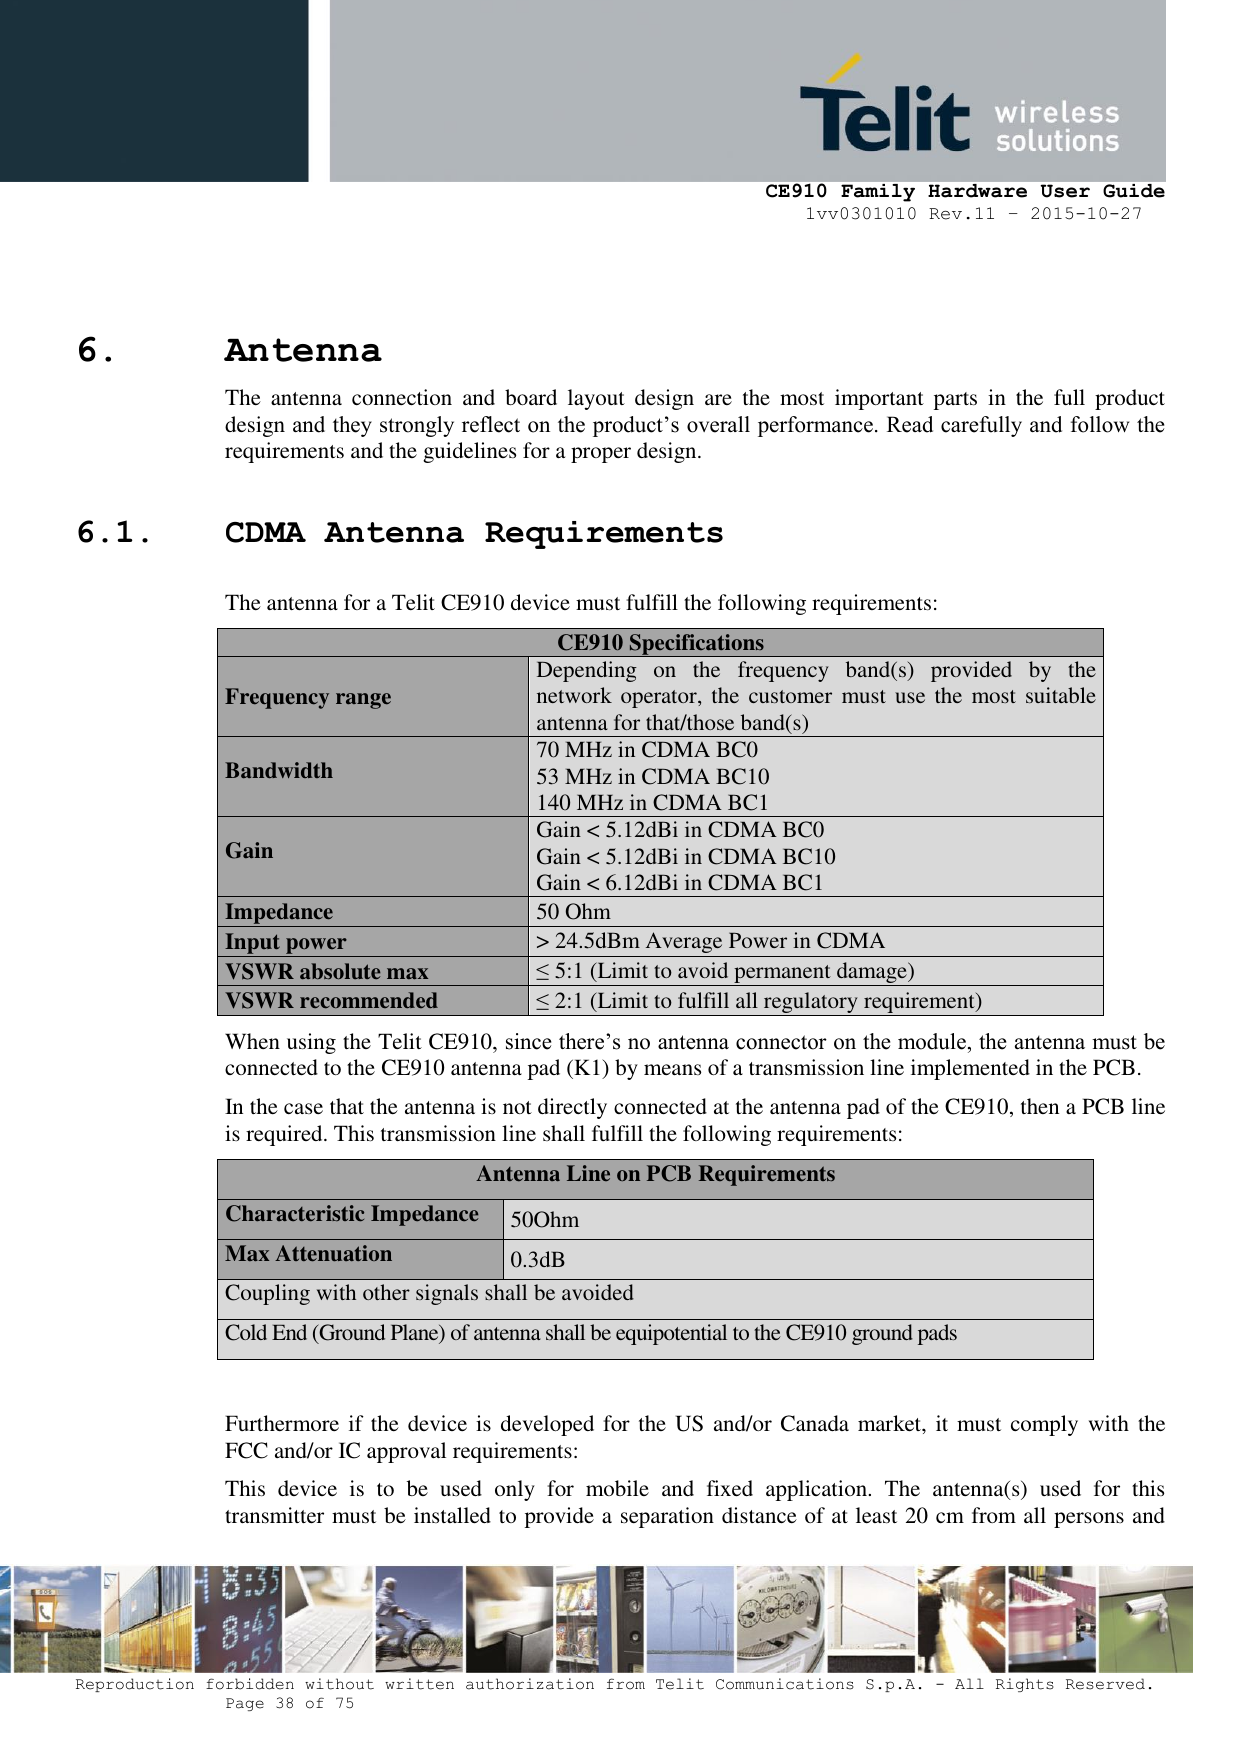     CE910 Family Hardware User Guide 1vv0301010 Rev.11 – 2015-10-27 Reproduction forbidden without written authorization from Telit Communications S.p.A. - All Rights Reserved.    Page 38 of 75                                                     6. Antenna  The  antenna  connection  and  board  layout  design  are  the  most  important  parts  in  the  full  product design and they strongly reflect on the product’s overall performance. Read carefully and follow the requirements and the guidelines for a proper design. 6.1. CDMA Antenna Requirements The antenna for a Telit CE910 device must fulfill the following requirements: CE910 Specifications Frequency range Depending  on  the  frequency  band(s)  provided  by  the network operator, the customer must use the  most suitable antenna for that/those band(s) Bandwidth 70 MHz in CDMA BC0 53 MHz in CDMA BC10 140 MHz in CDMA BC1 Gain Gain &lt; 5.12dBi in CDMA BC0 Gain &lt; 5.12dBi in CDMA BC10 Gain &lt; 6.12dBi in CDMA BC1 Impedance 50 Ohm Input power &gt; 24.5dBm Average Power in CDMA VSWR absolute max ≤ 5:1 (Limit to avoid permanent damage) VSWR recommended ≤ 2:1 (Limit to fulfill all regulatory requirement) When using the Telit CE910, since there’s no antenna connector on the module, the antenna must be connected to the CE910 antenna pad (K1) by means of a transmission line implemented in the PCB. In the case that the antenna is not directly connected at the antenna pad of the CE910, then a PCB line is required. This transmission line shall fulfill the following requirements: Antenna Line on PCB Requirements Characteristic Impedance 50Ohm Max Attenuation 0.3dB Coupling with other signals shall be avoided Cold End (Ground Plane) of antenna shall be equipotential to the CE910 ground pads  Furthermore if the device is developed for the US and/or Canada market, it must comply with the FCC and/or IC approval requirements: This  device  is  to  be  used  only  for  mobile  and  fixed  application.  The  antenna(s)  used  for  this transmitter must be installed to provide a separation distance of at least 20 cm from all persons and 